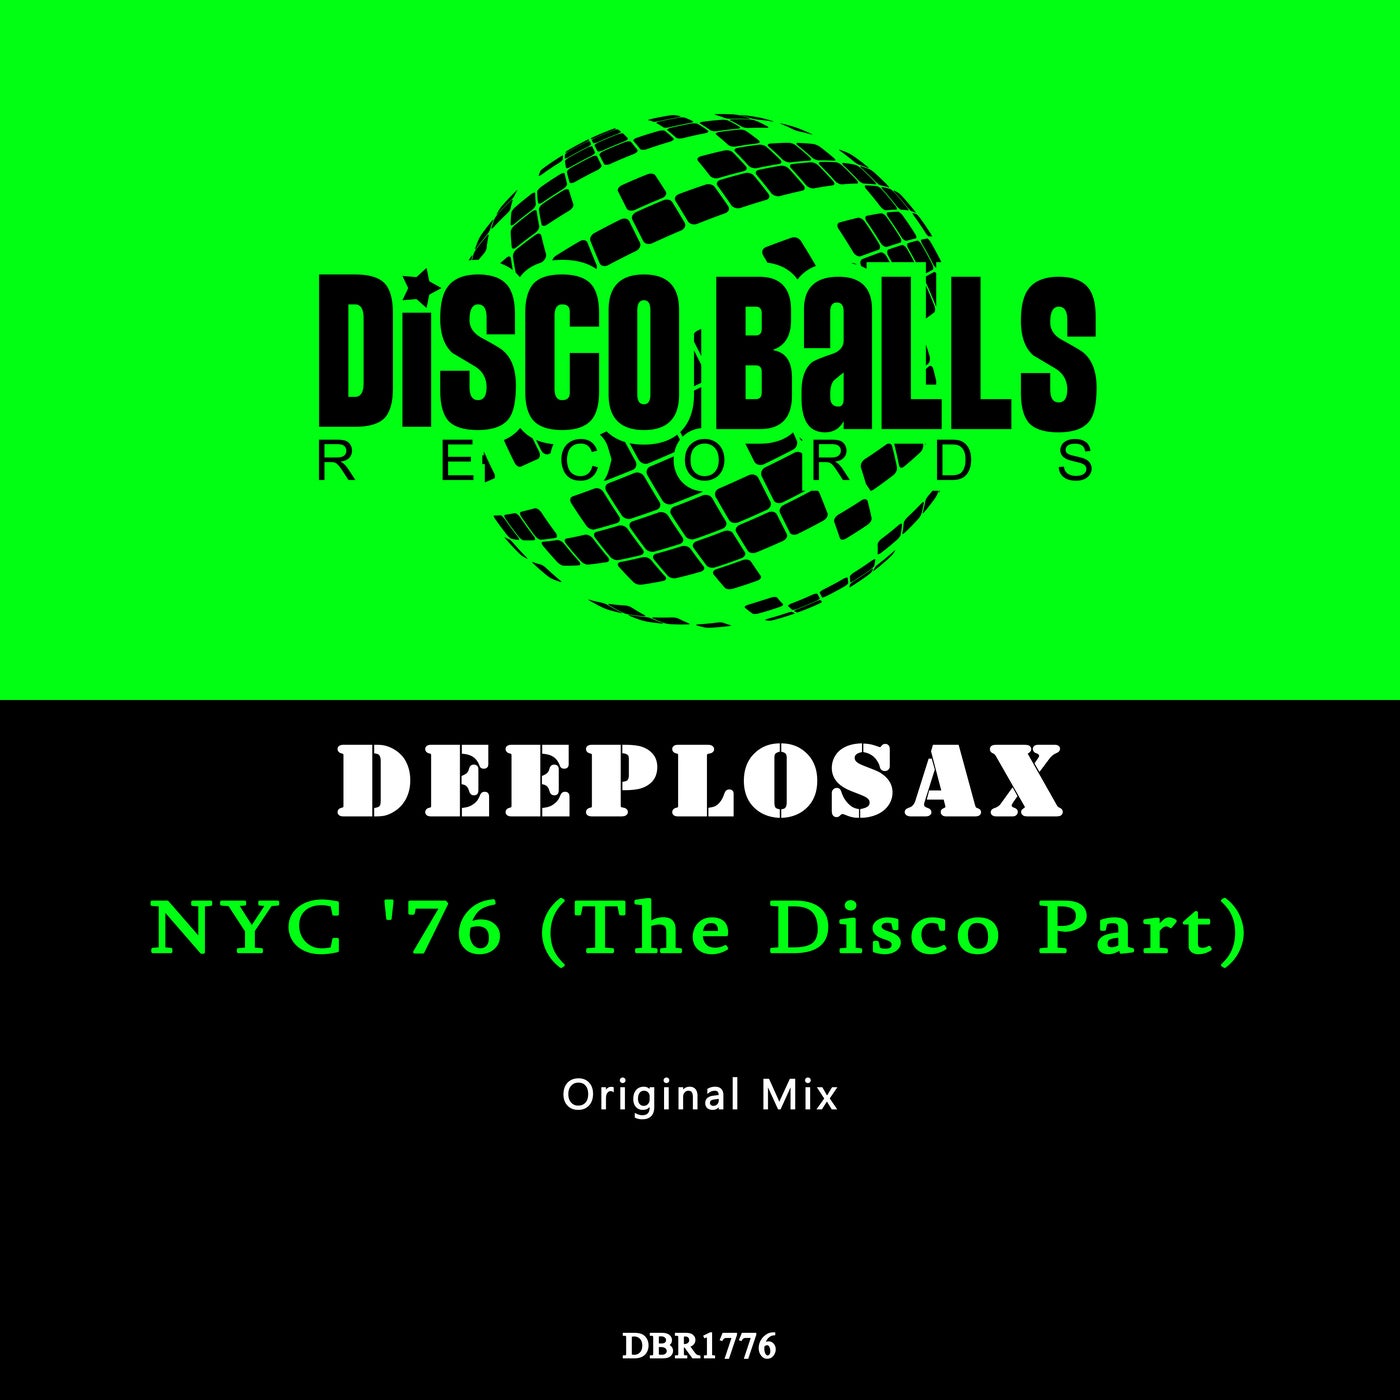 NYC '76 (The Disco Part)